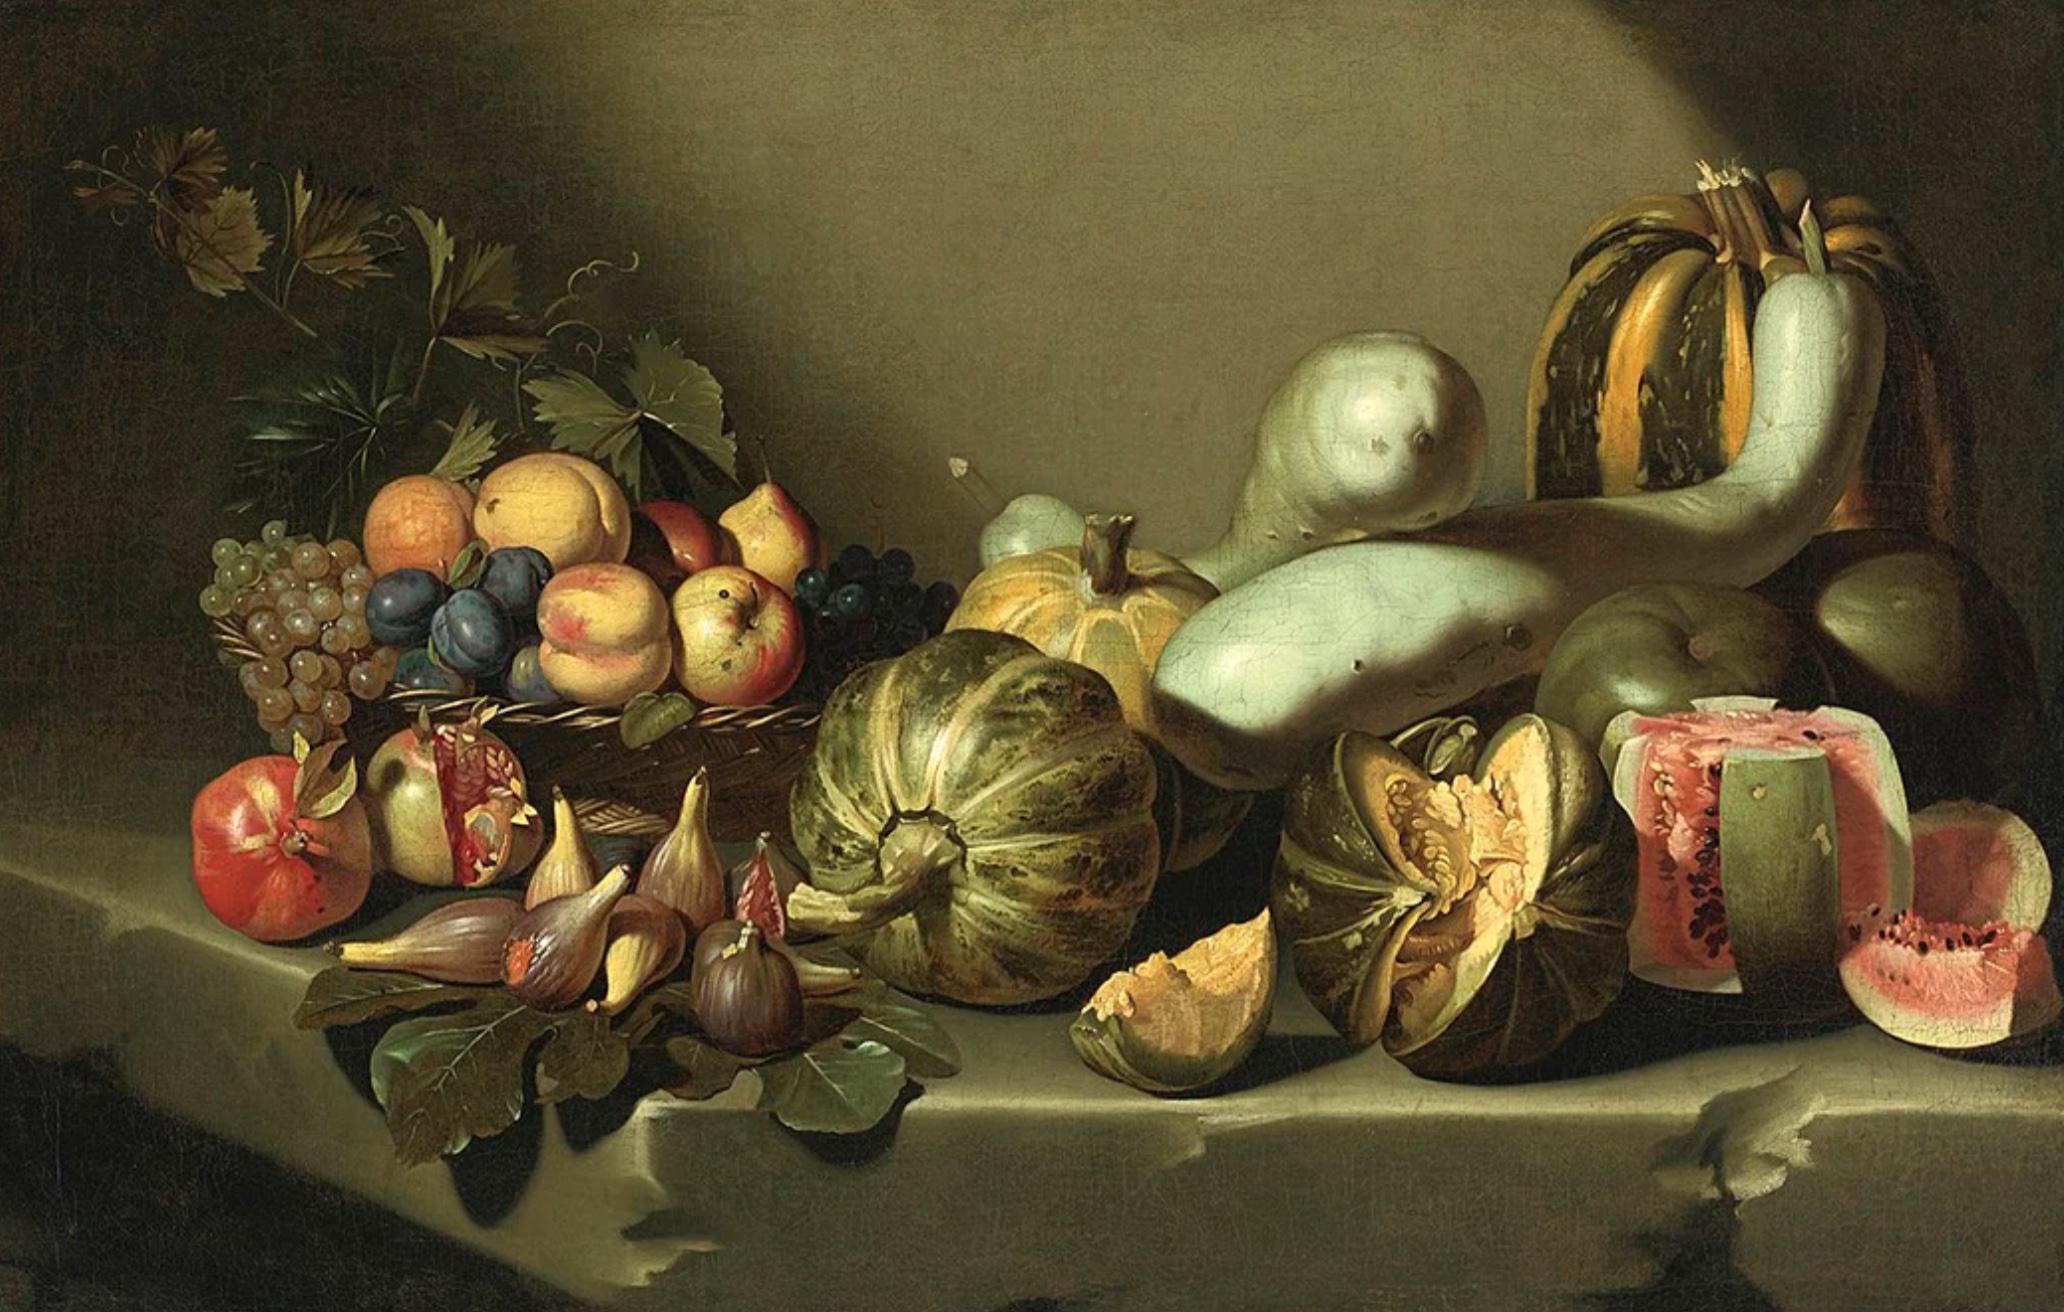 A Renaissance painting featuring a table adorned with an array of fruits and vegetables, potentially concealing subtle sexual metaphors.